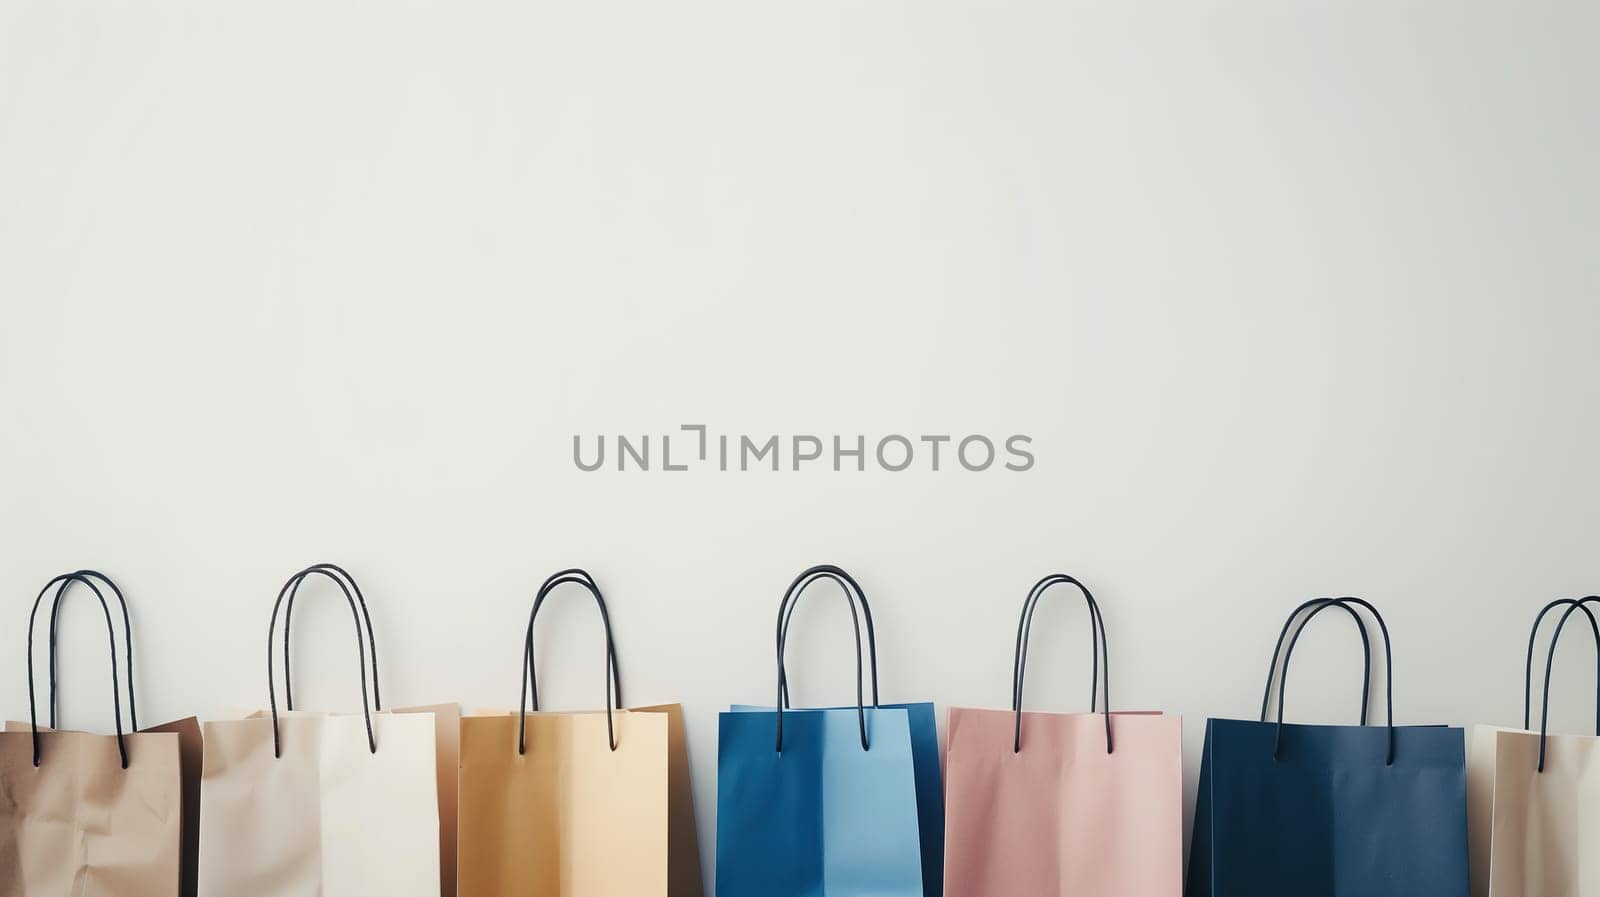 A row of colorful shopping bags, representing a sale concept or Black Friday shopping, lined up neatly against a plain wall in a retail store.